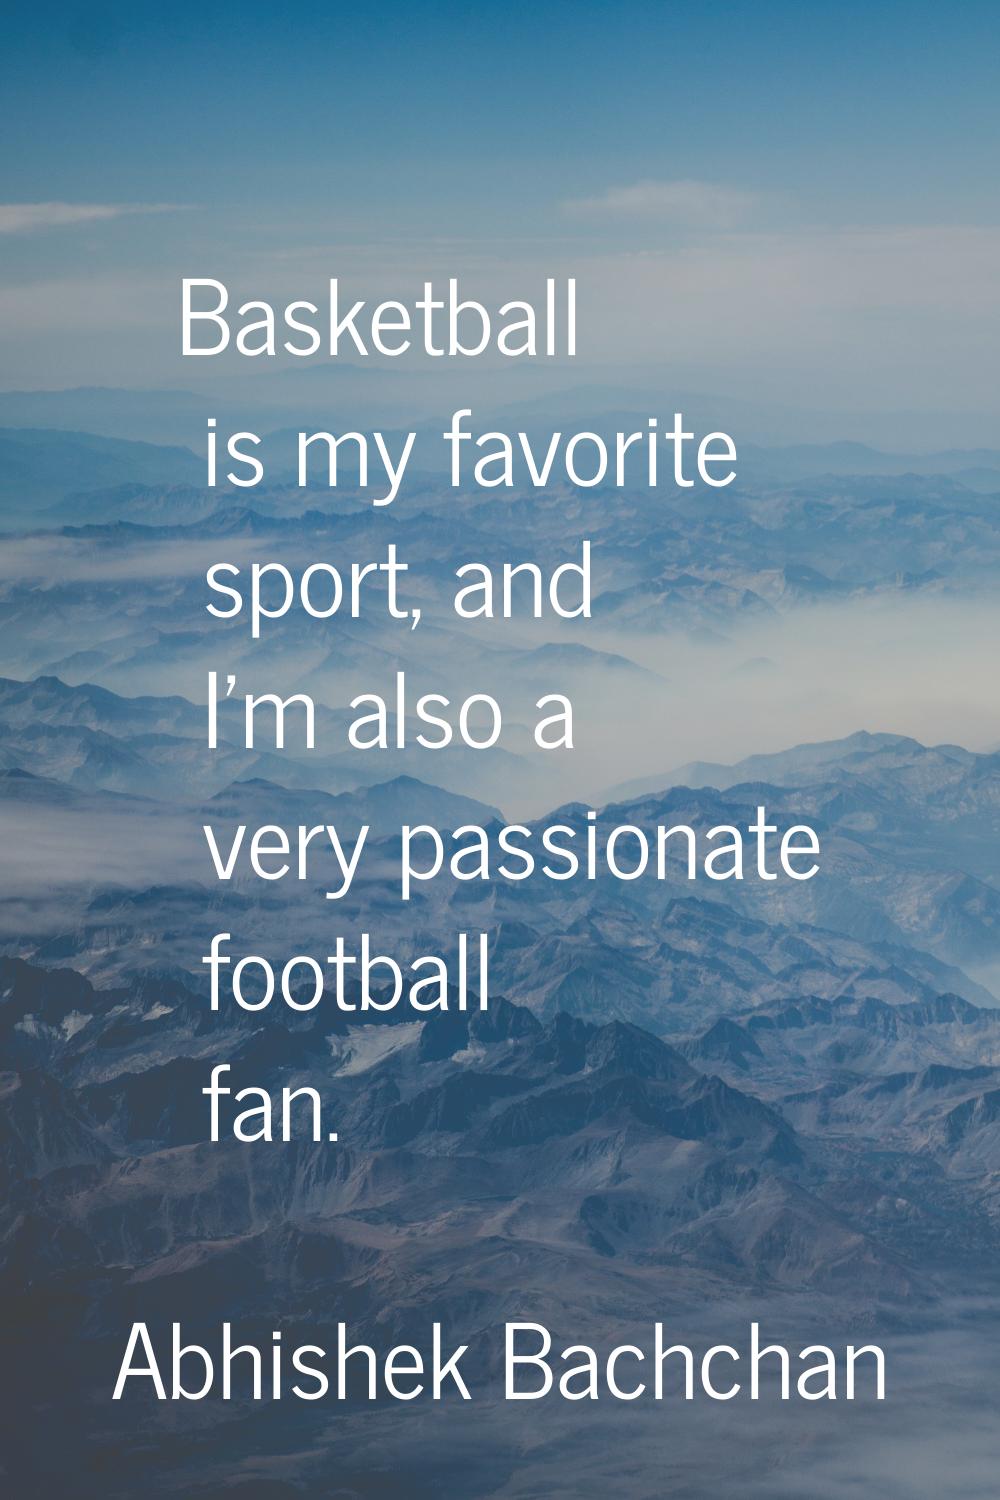 Basketball is my favorite sport, and I'm also a very passionate football fan.